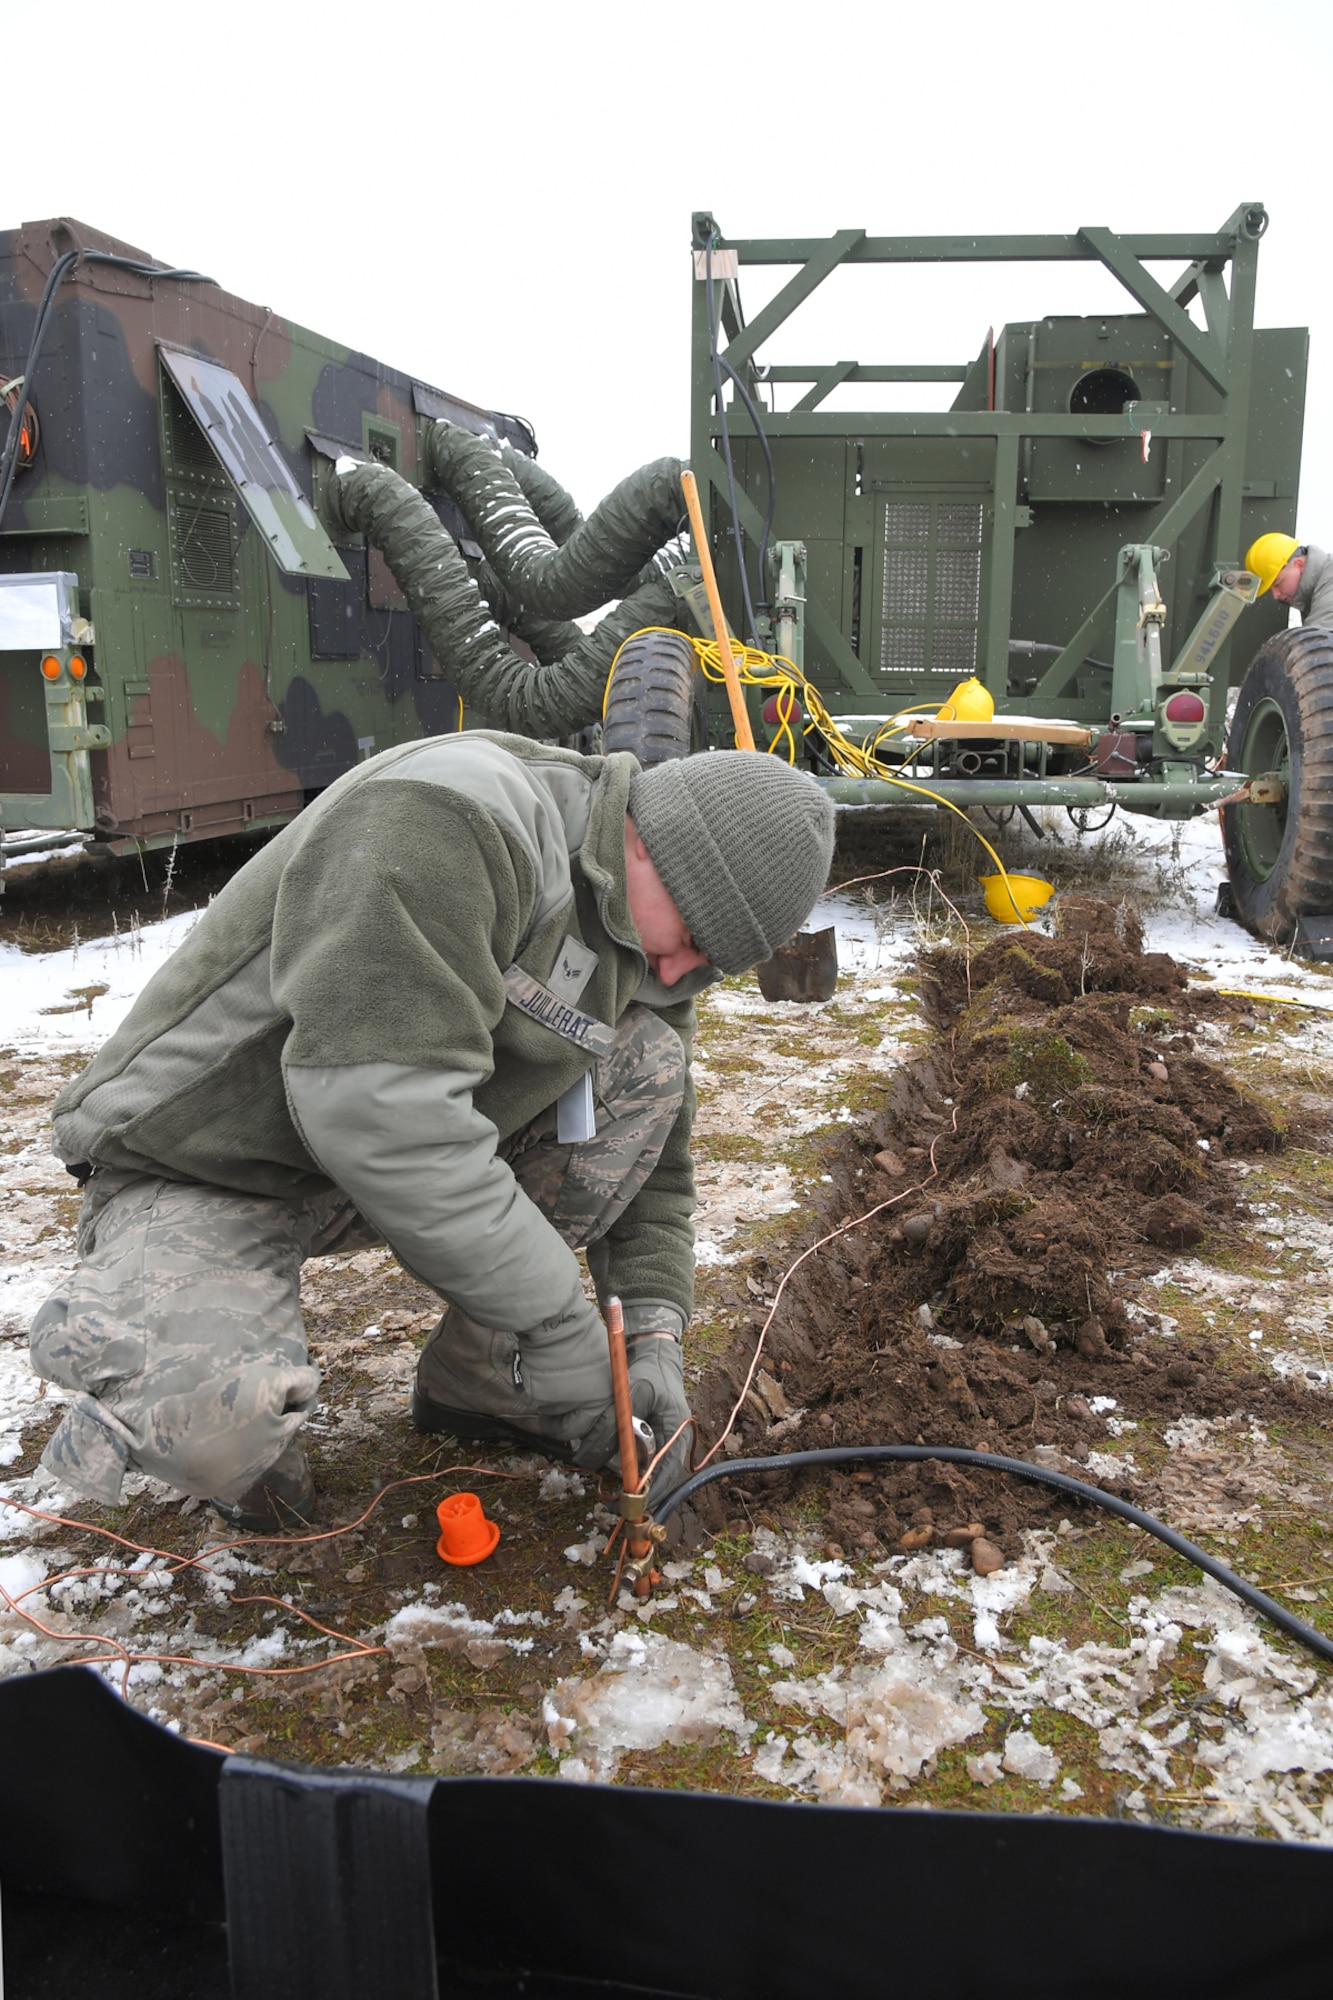 Airman 1st Class Thomas Juillerat, 729th Air Control Squadron, hooks up an equipment grounding wire, Feb. 5, 2019, during a readiness exercise at Hill Air Force Base, Utah. The evolution was part of an exercise to mobilize and set up a deployed radar location and control reporting center. (U.S. Air Force photo by Todd Cromar)